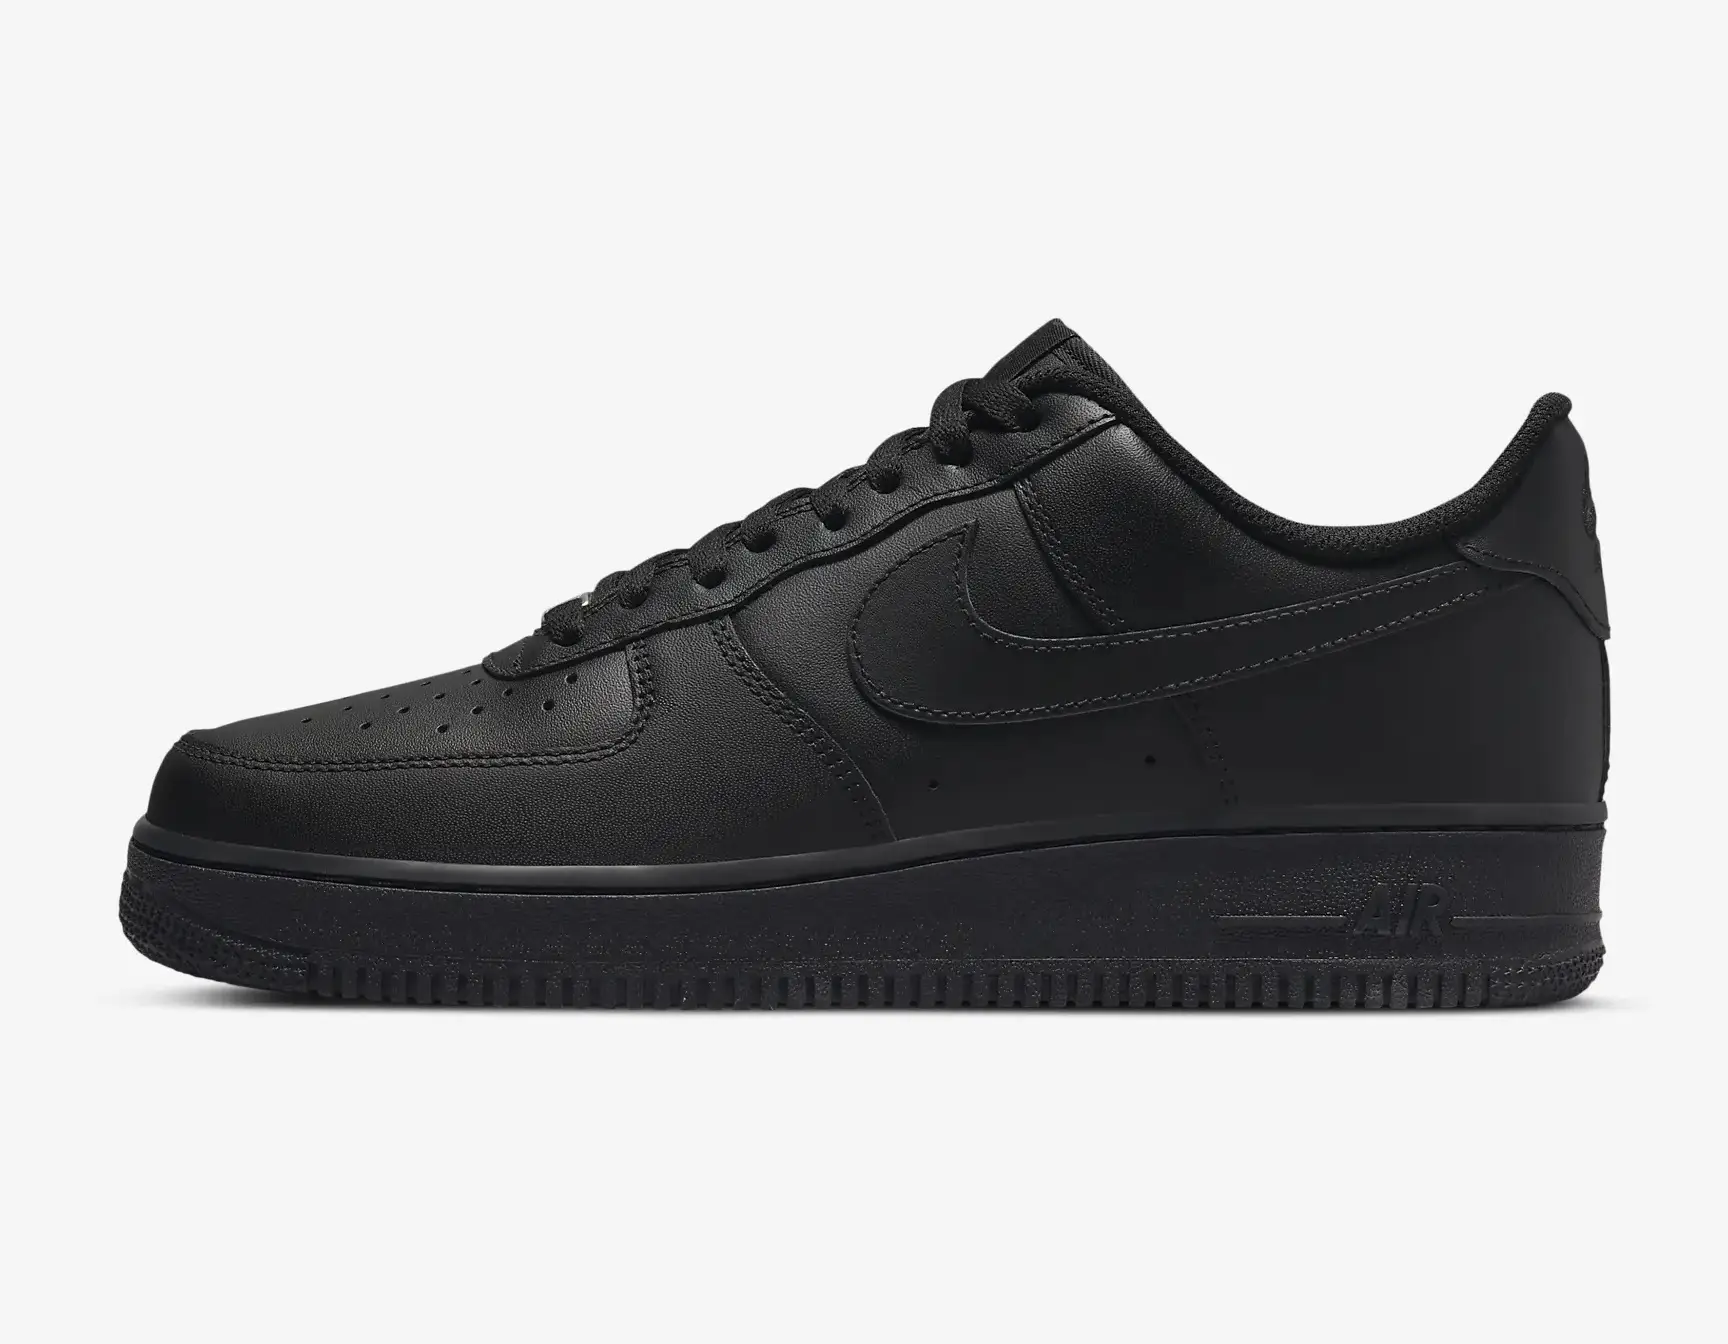 Nike Air Force 1 Sizing: Does the Air Force 1 Fit True to Size